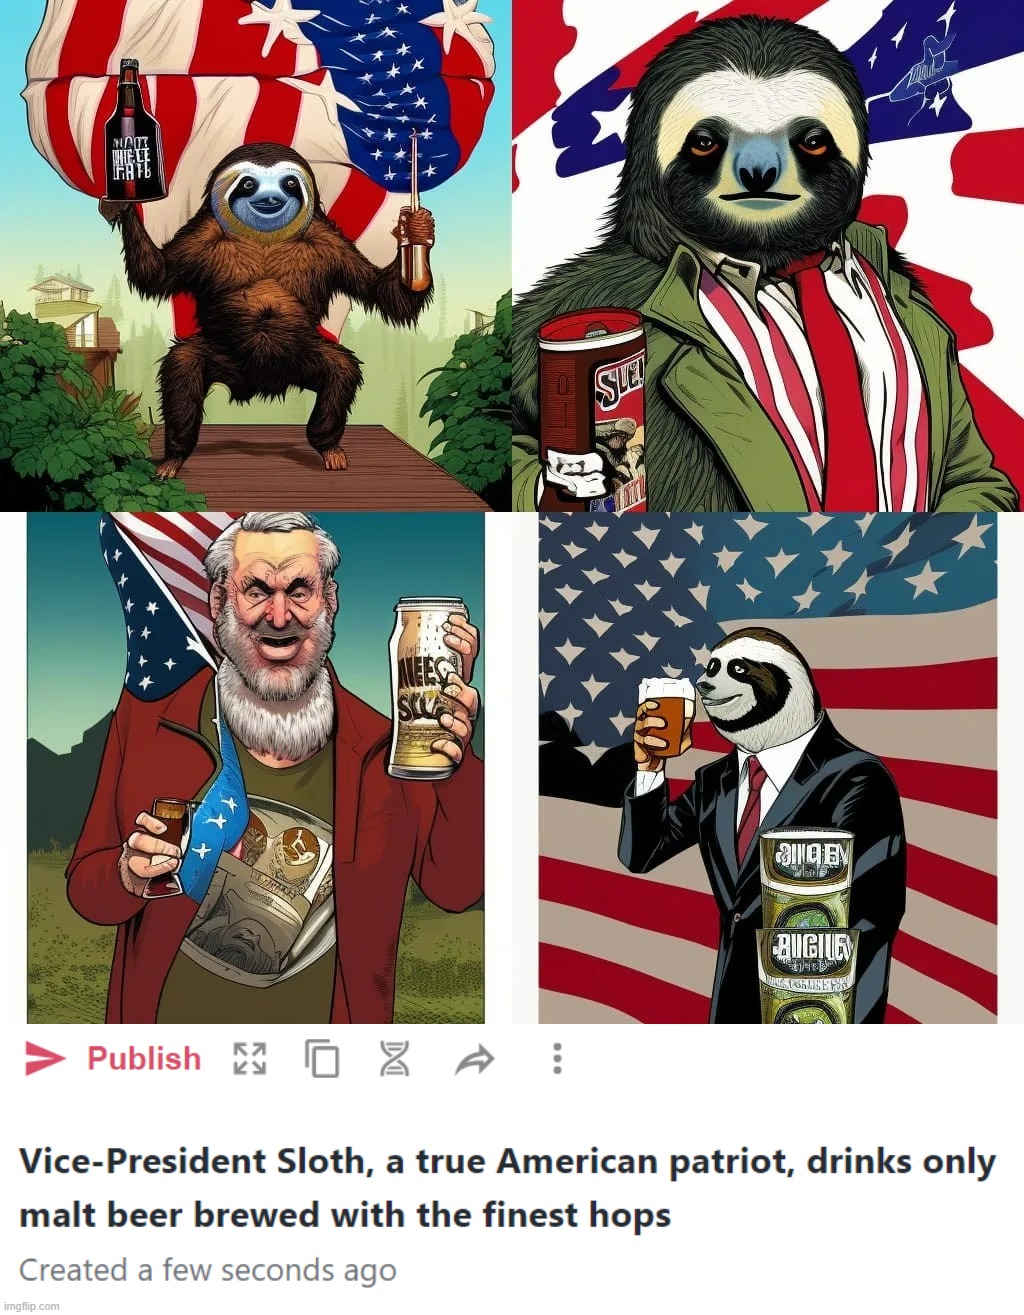 3 of these panels depict me; the bottom-left panel depicts a man who passionately identified himself as a "Sloth supporter" | image tagged in vice-president sloth drinks malt beer,sloth supporter,sloth,finest,malt,maltgate | made w/ Imgflip meme maker